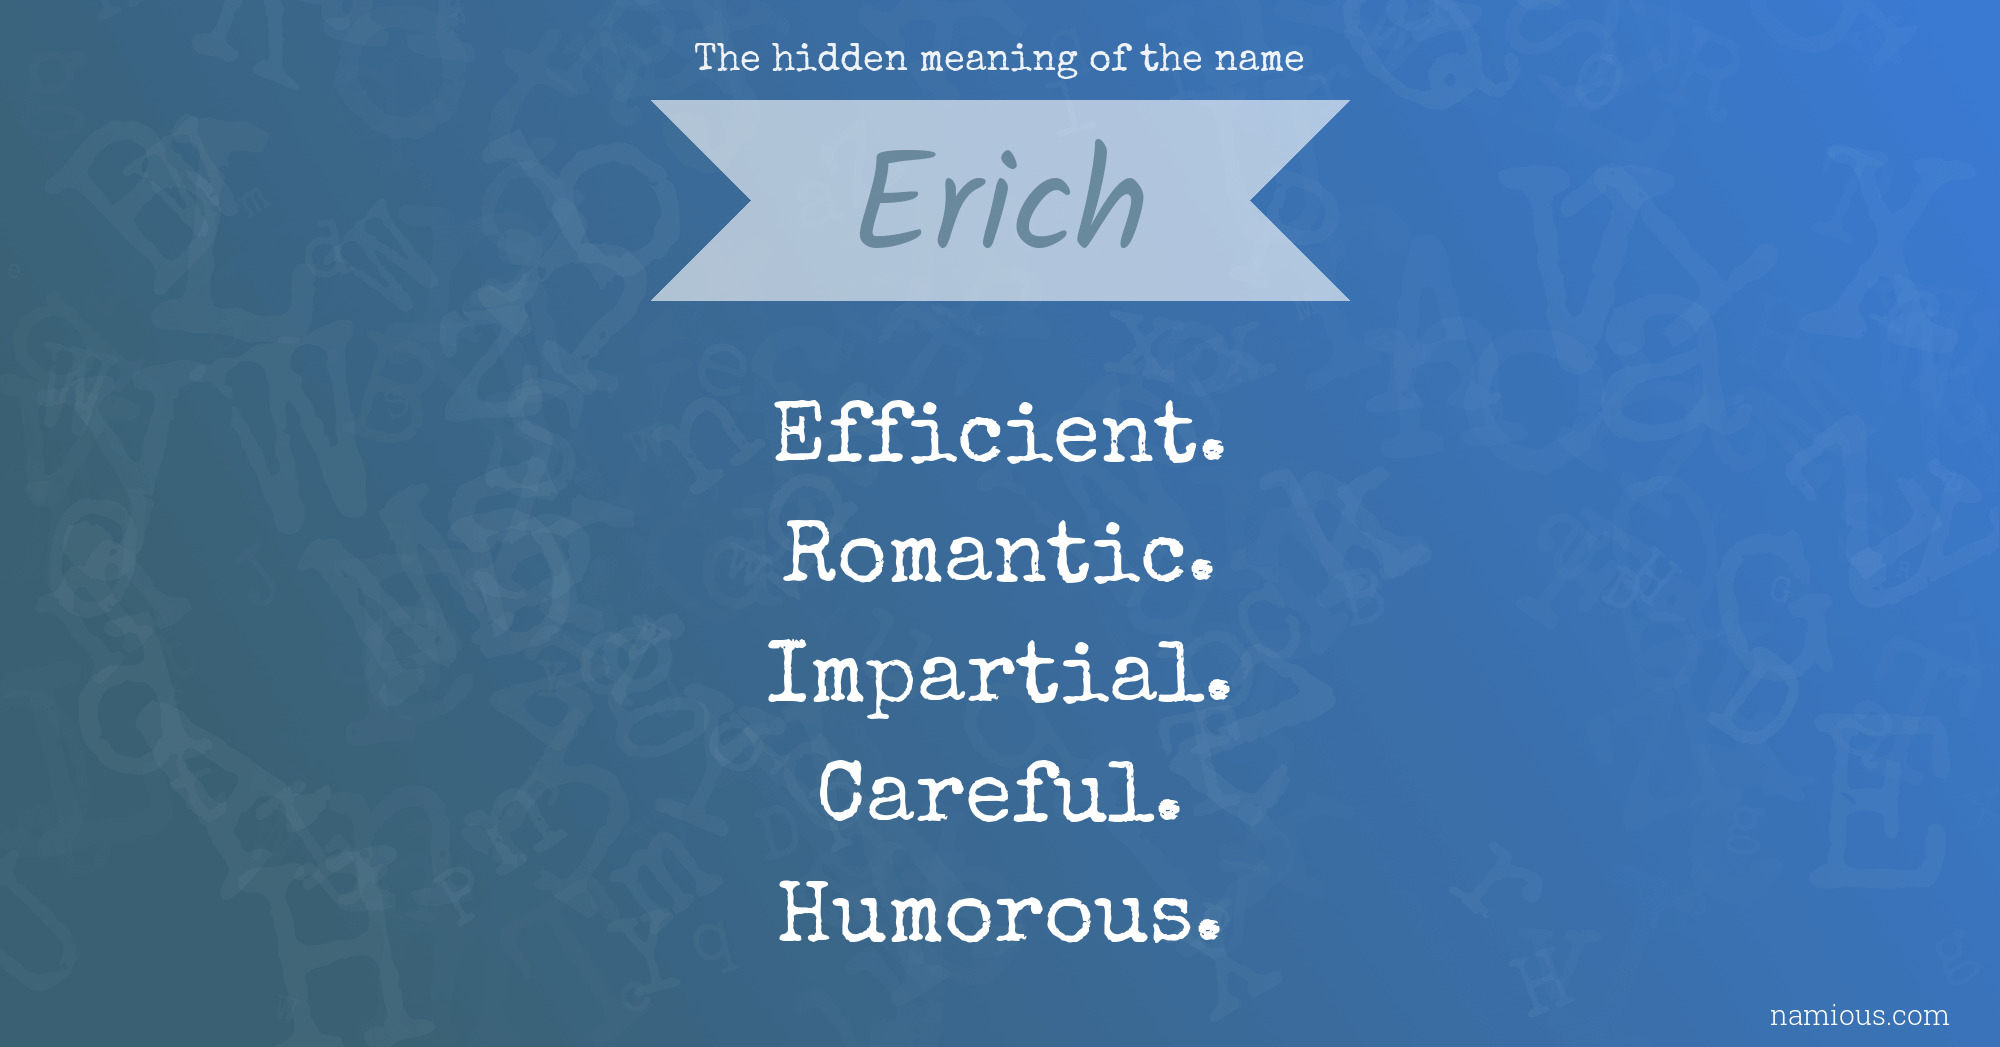 The hidden meaning of the name Erich